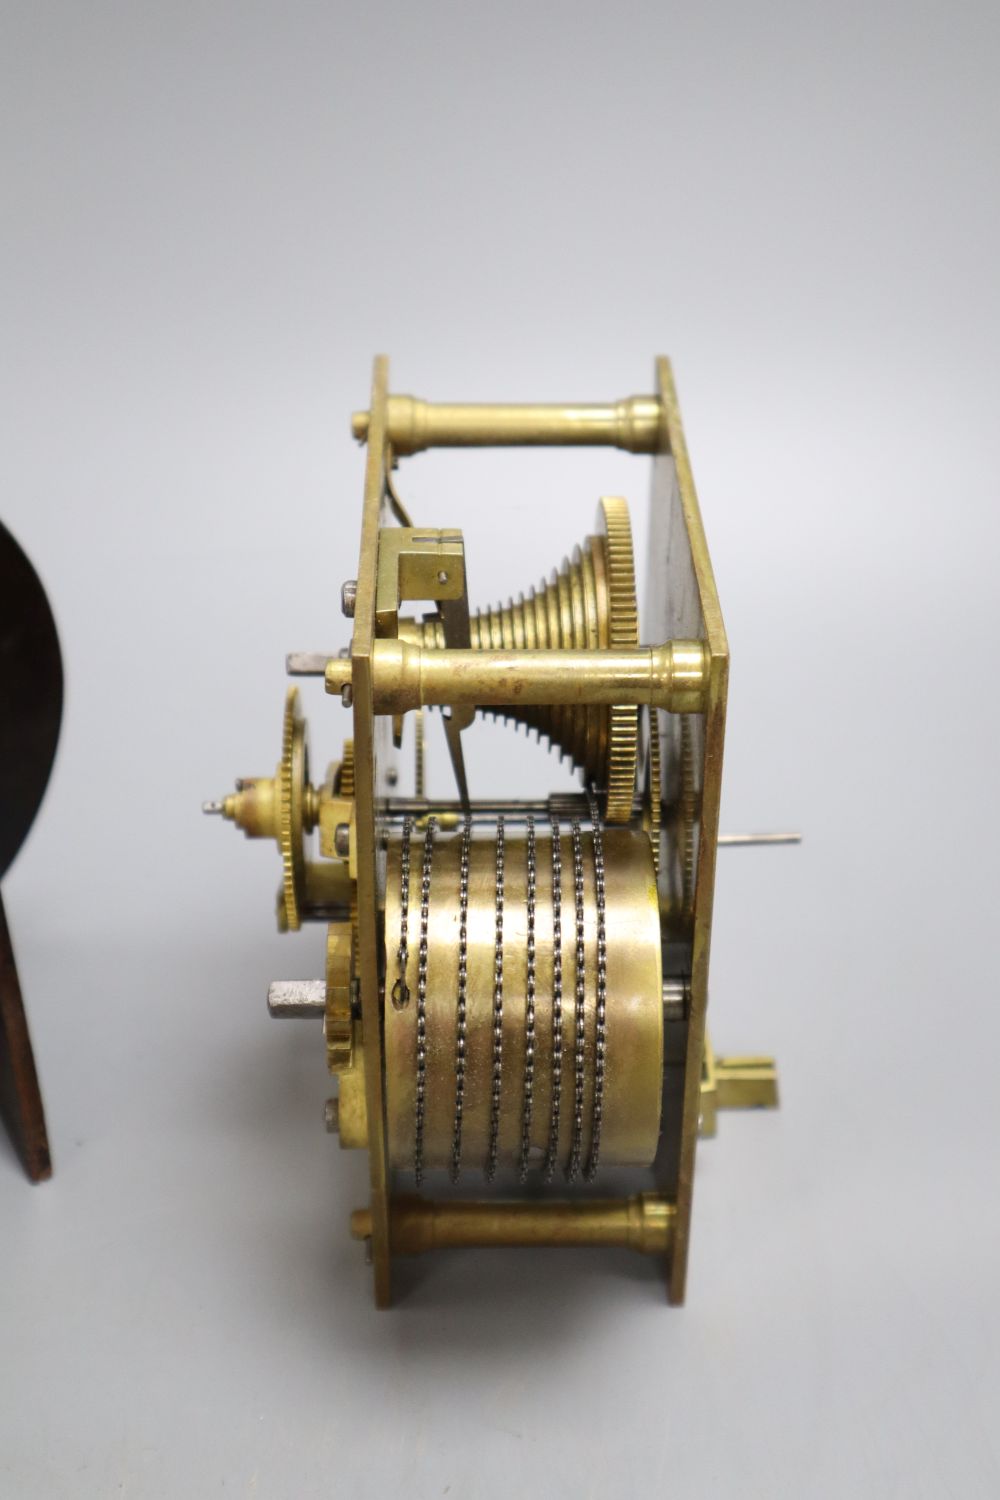 A brass GWR timepiece, a Smiths oak framed timepiece and a fusee clock movement